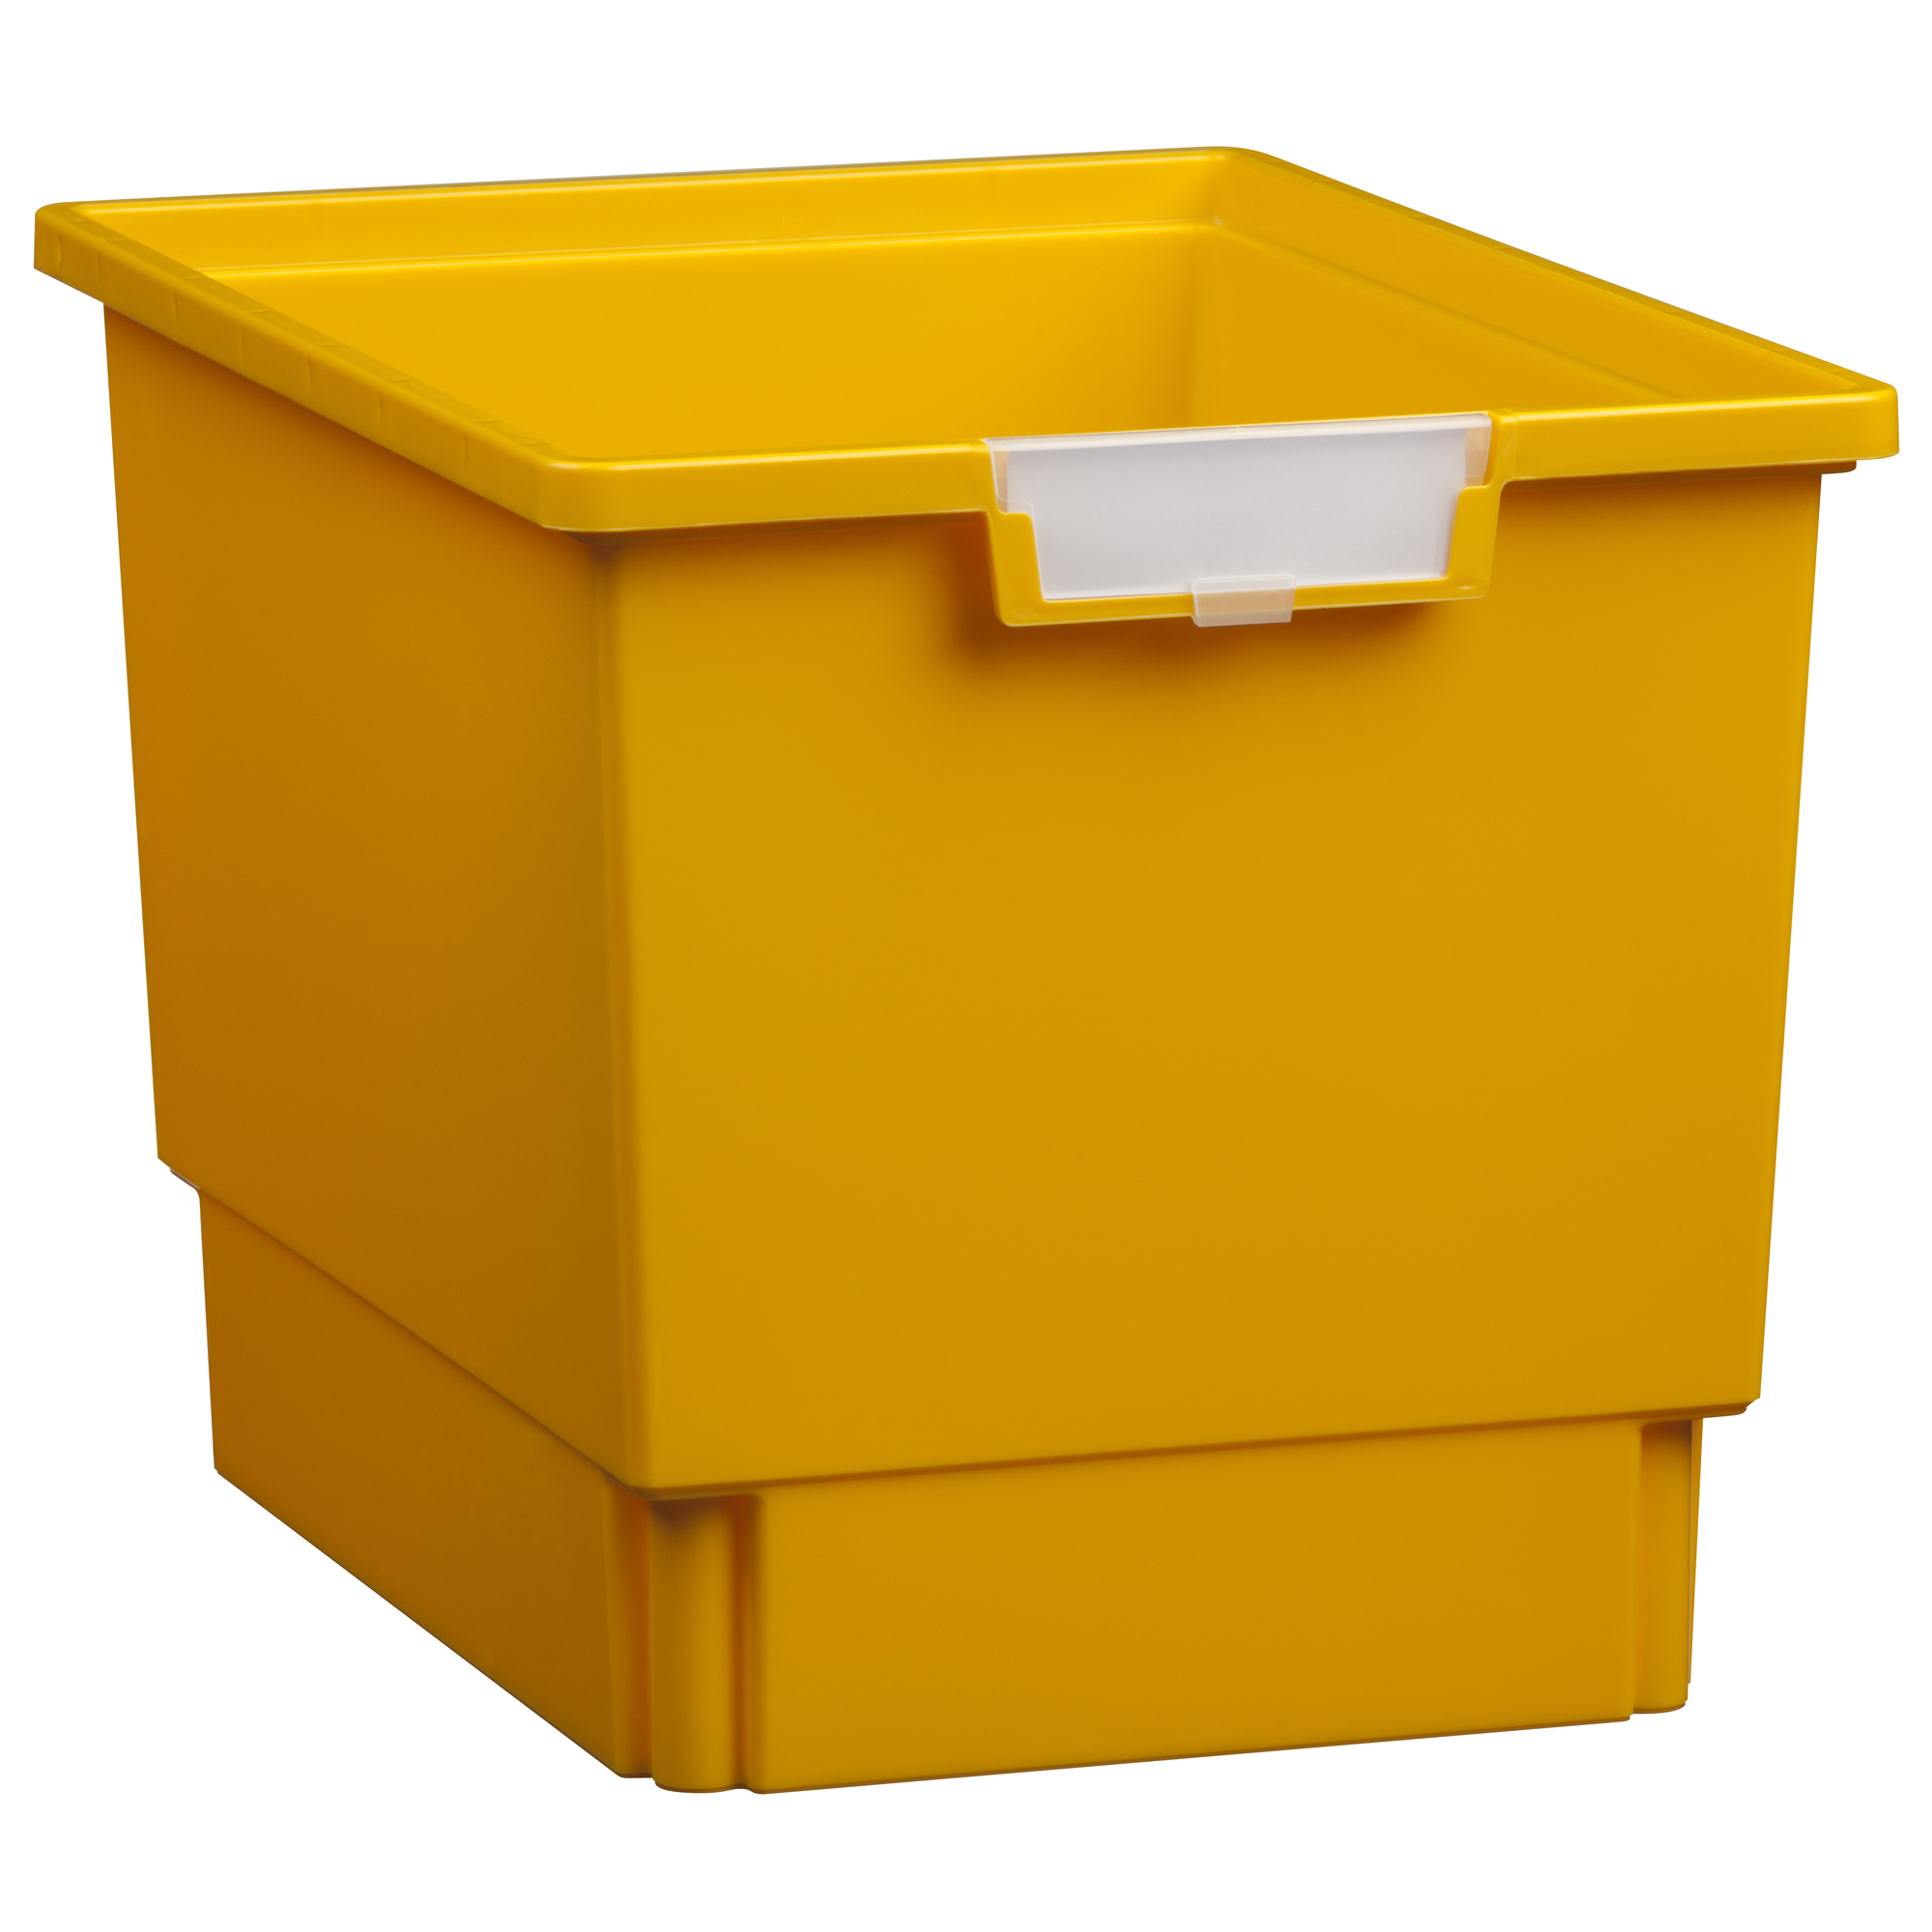 Certwood StorWerks, Slim Line 12Inch Tray in Primary Yellow-3PK, Included (qty.) 3 Height 12 in, Model CE1954PY3